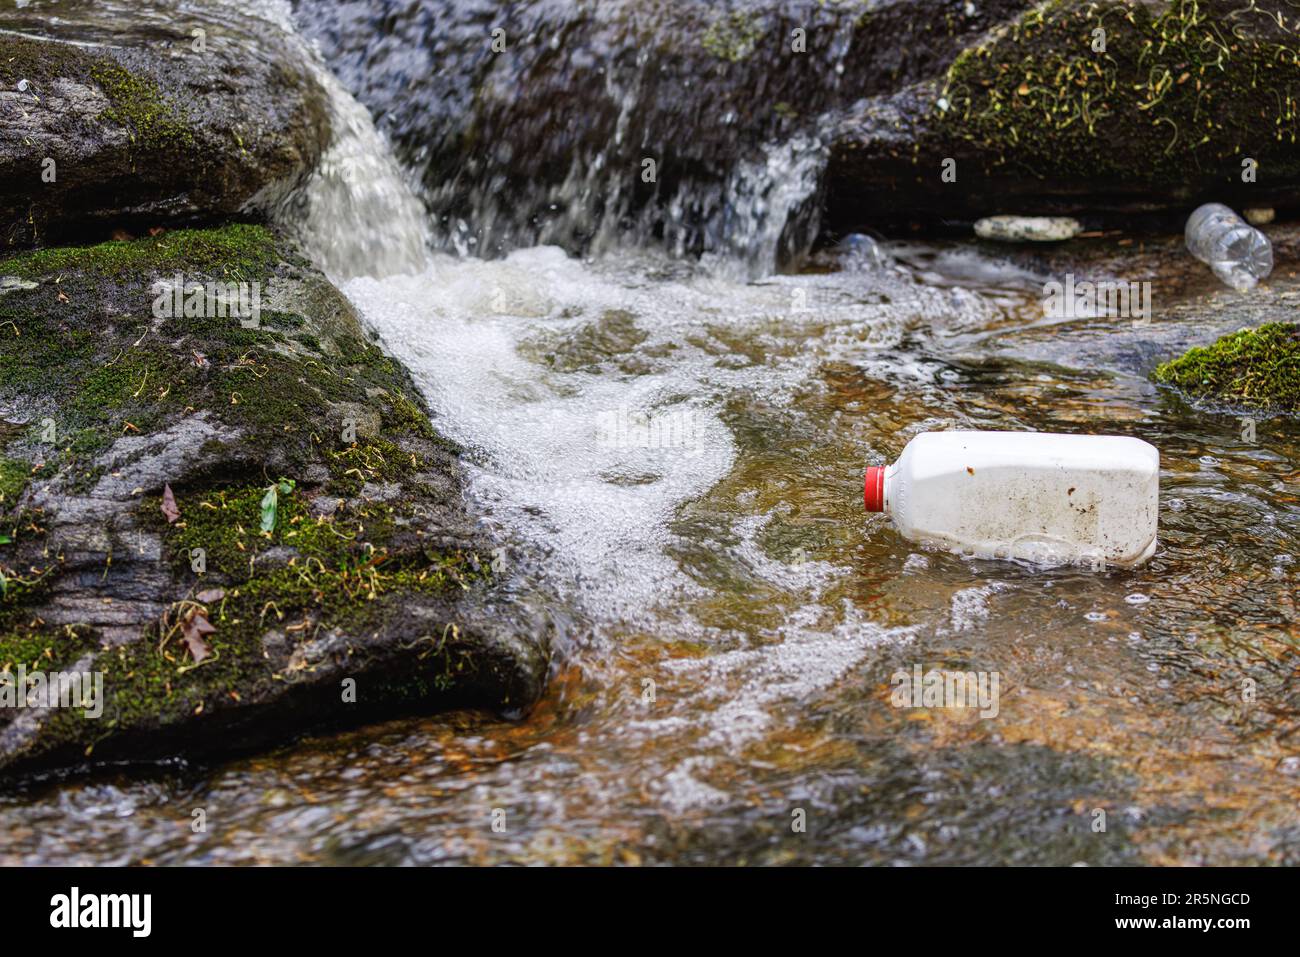 Empty Milk Jug litter floating in Pristine Flowing Stream showing environmental pollution Stock Photo